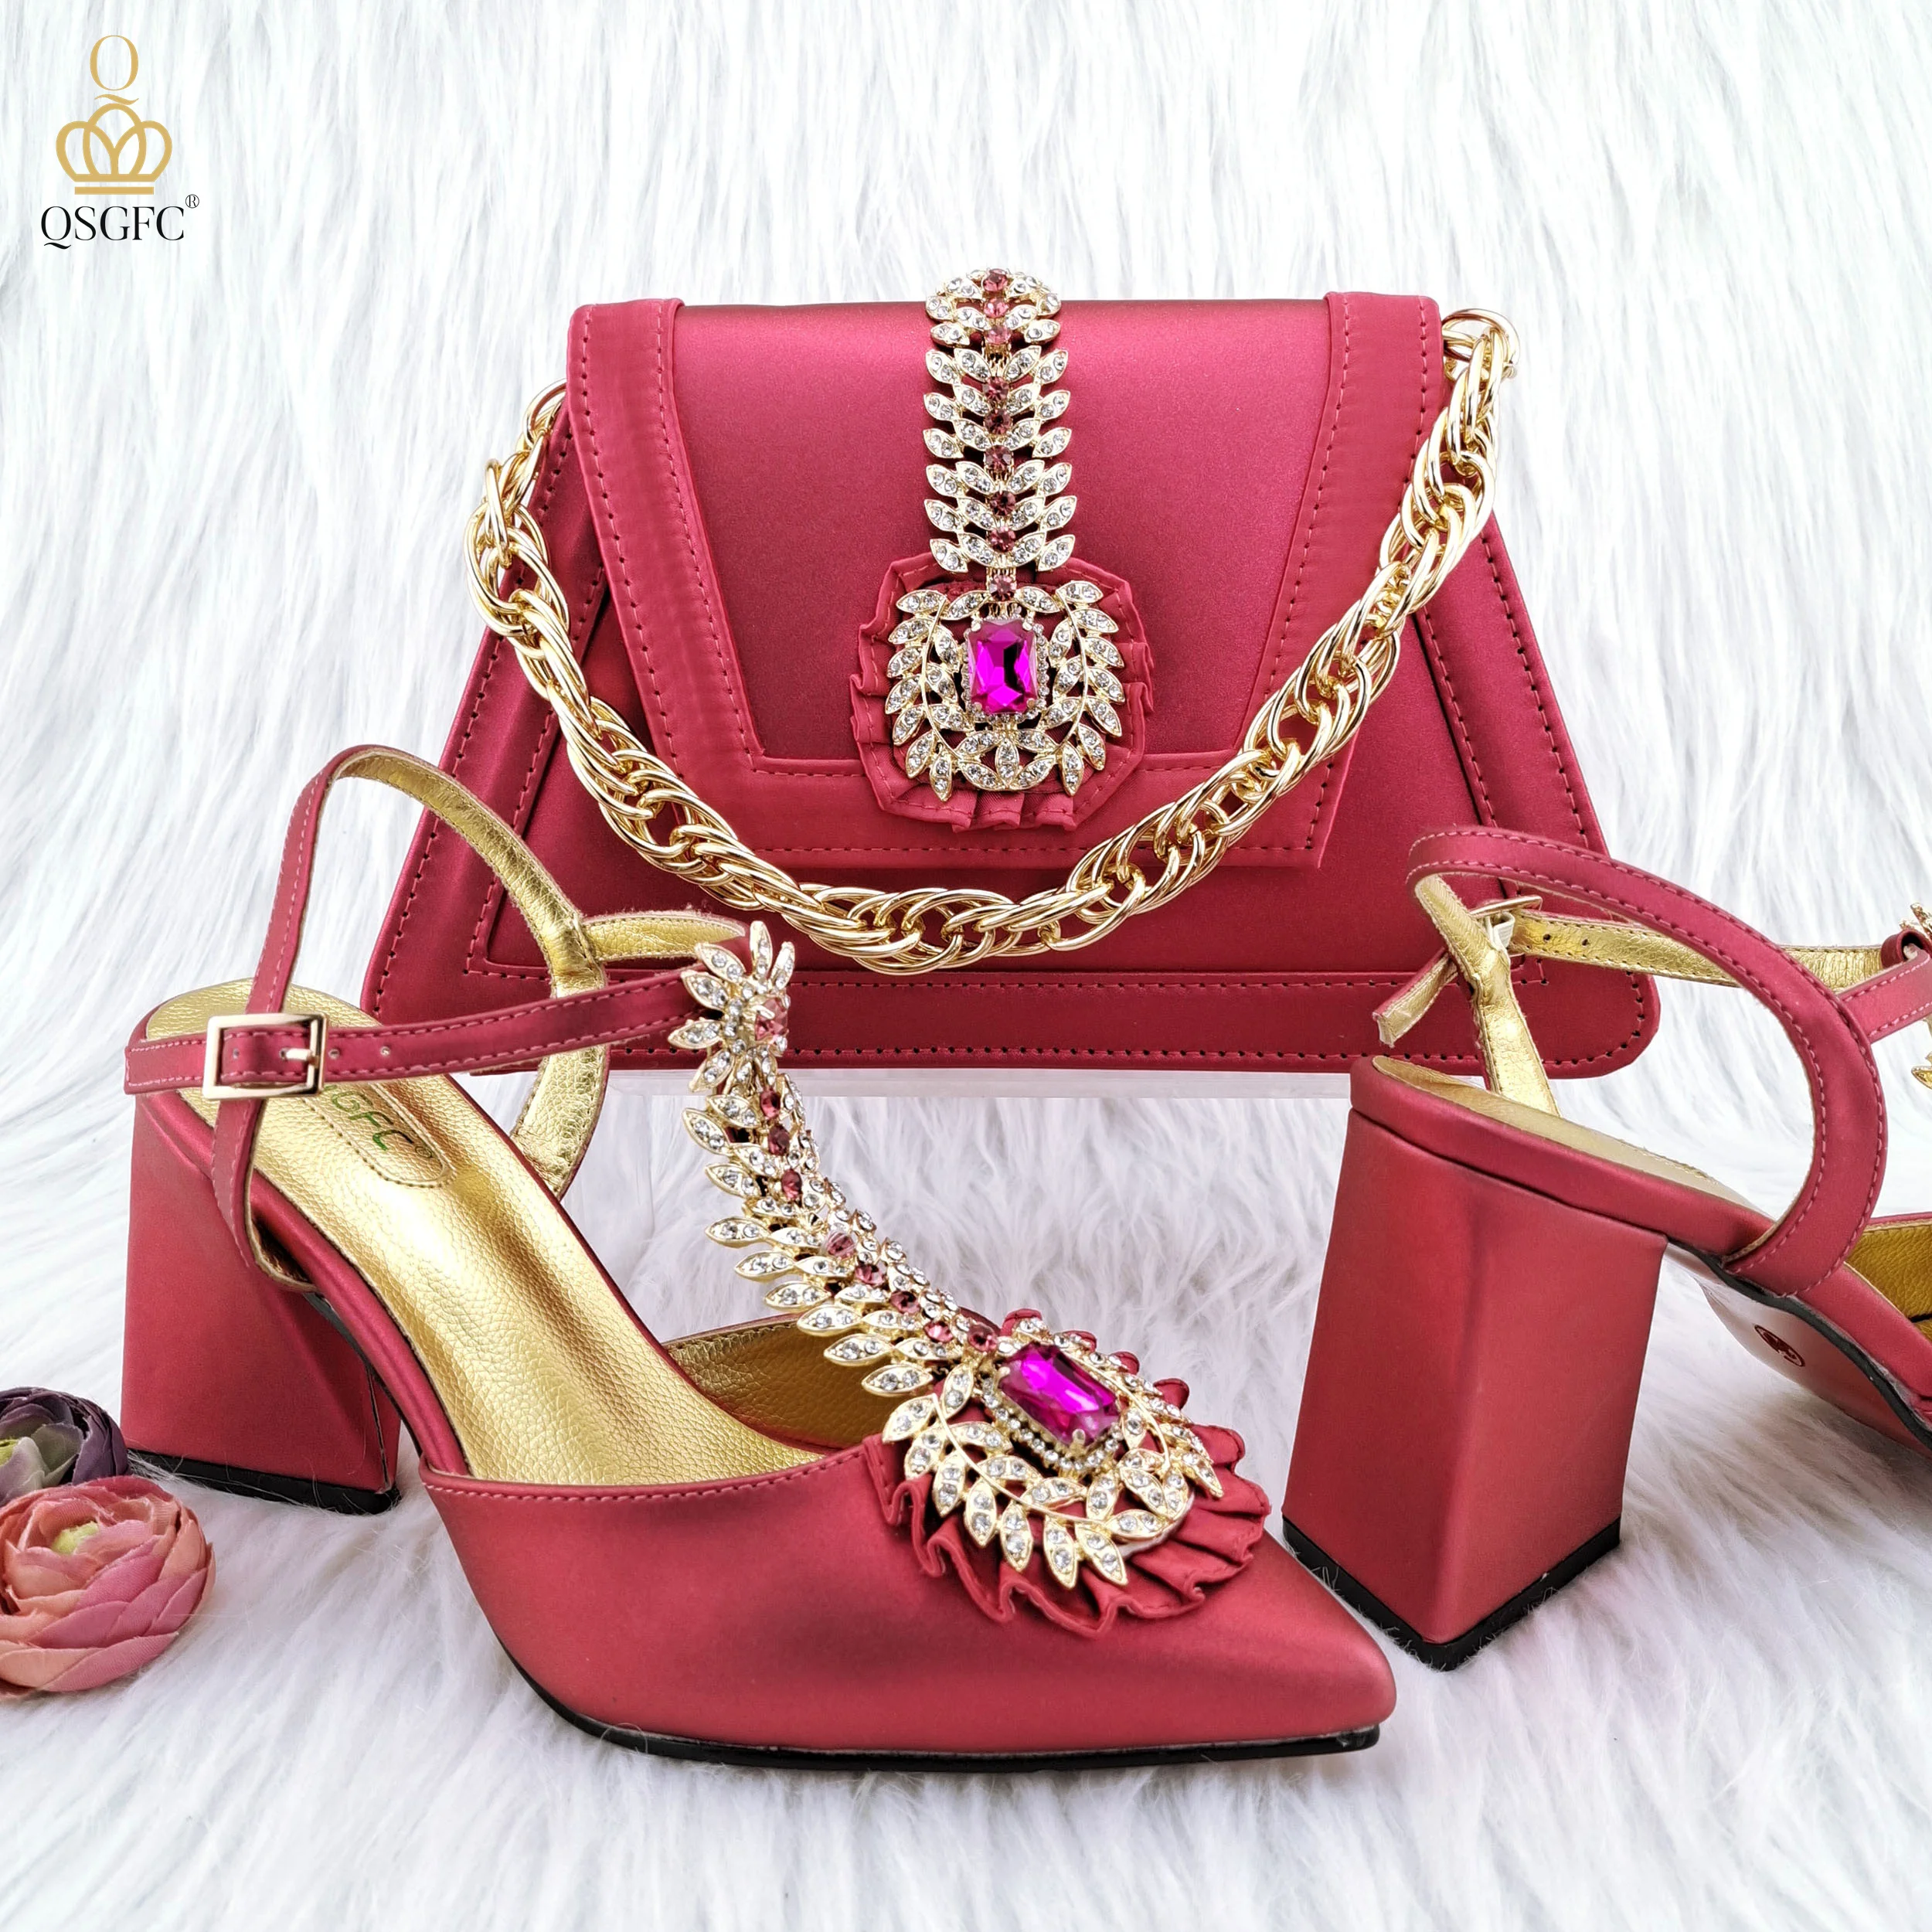 

QSGFC New Design Fuchsia Three-dimensional Bag With Shiny Diamond Decorated High Heels Shoes Nigeria Ladies Party Shoe Bag Set